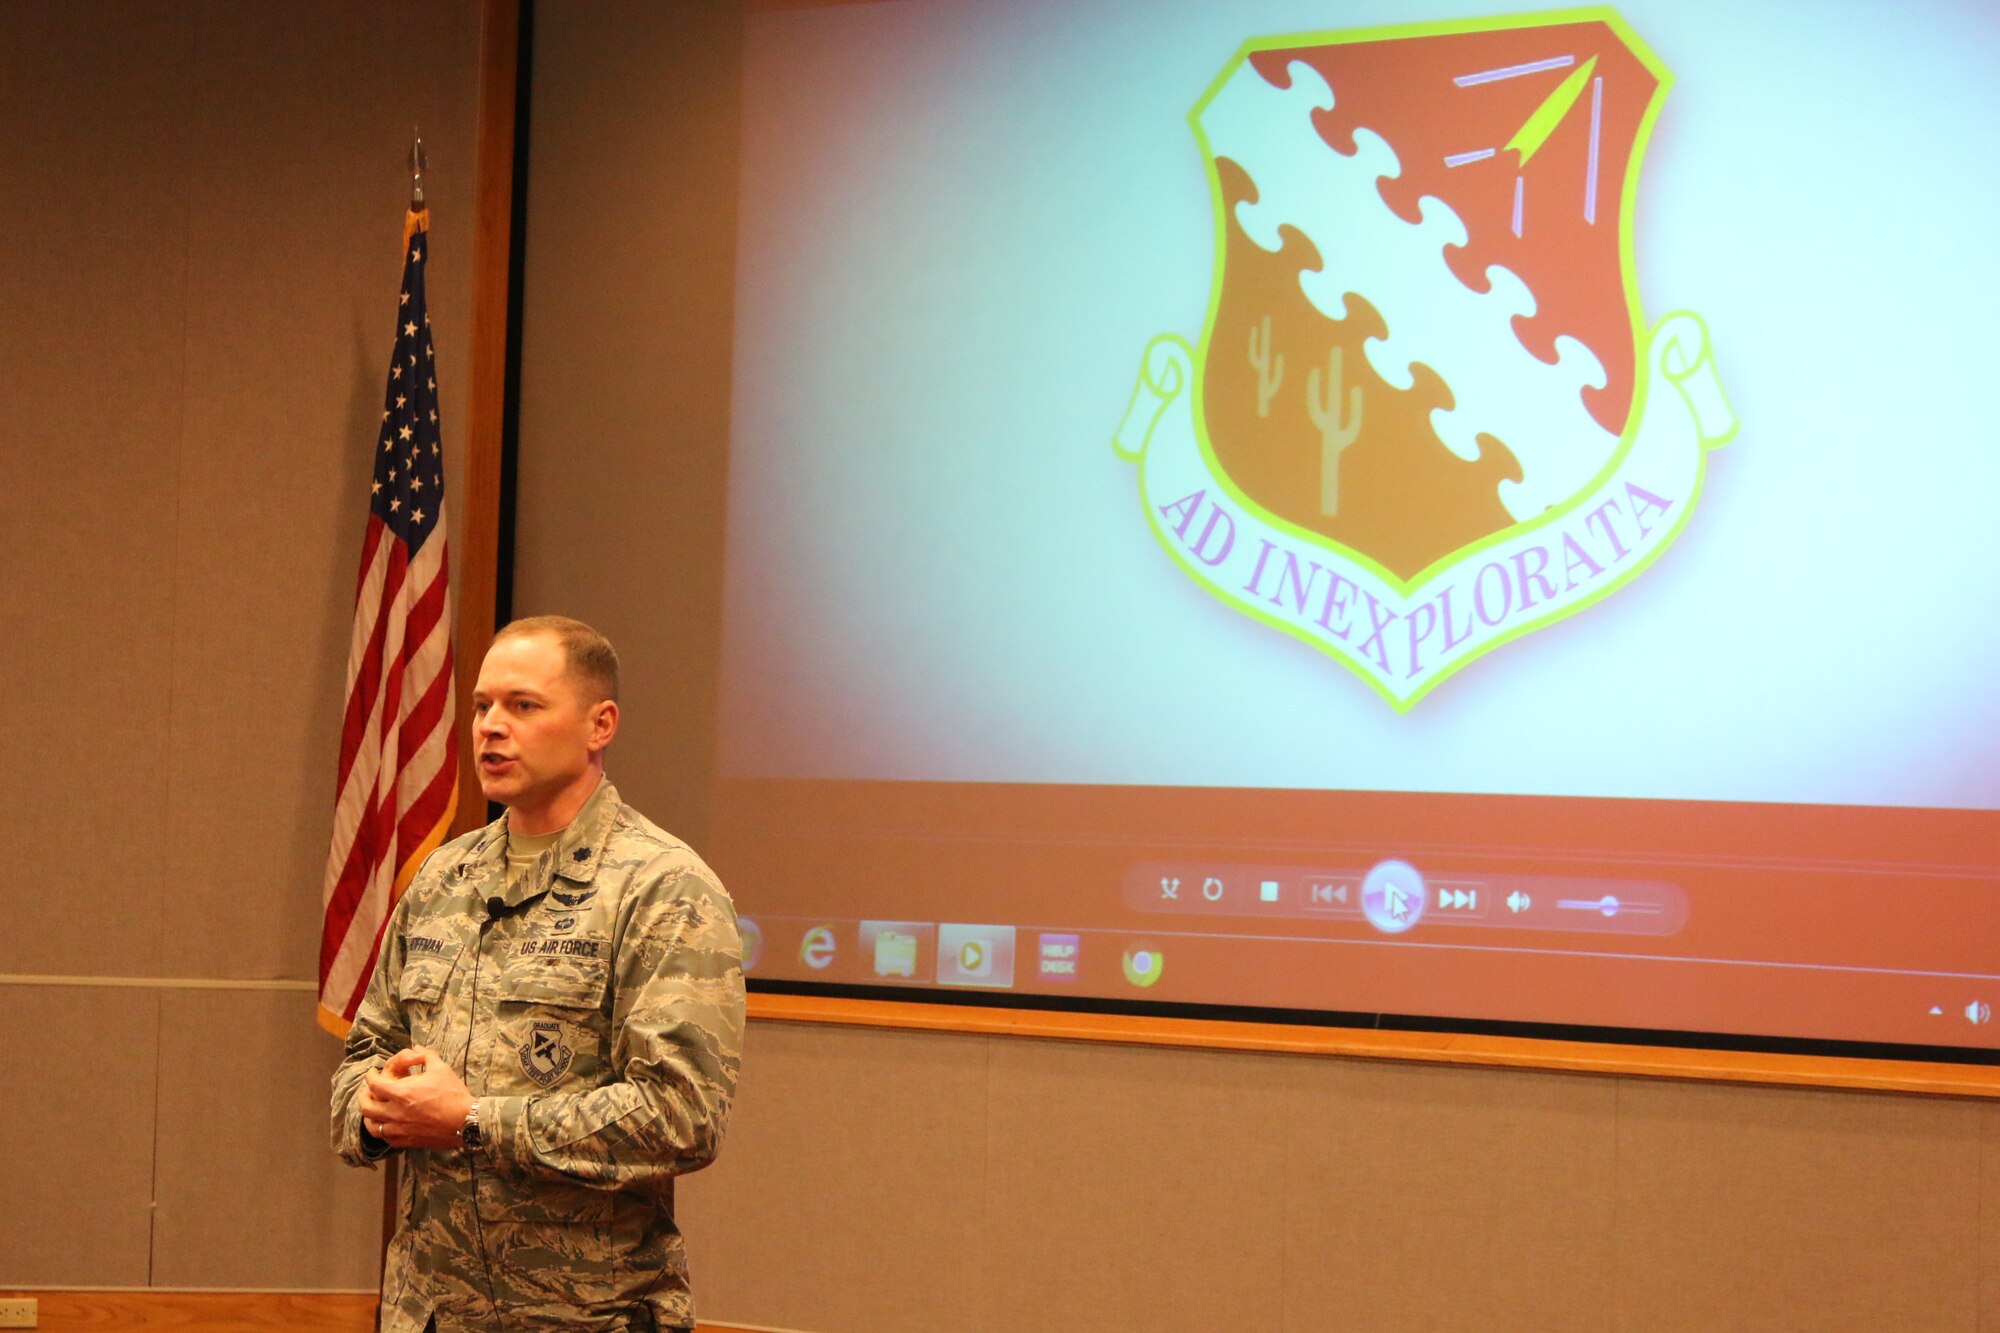 Flight Systems Combined Test Force Director Lt. Col. David Hoffman speaks with CTF personnel during a recent session to discuss safety and security issues. CTF operations were stood down on Feb. 5 for safety and security discussions.